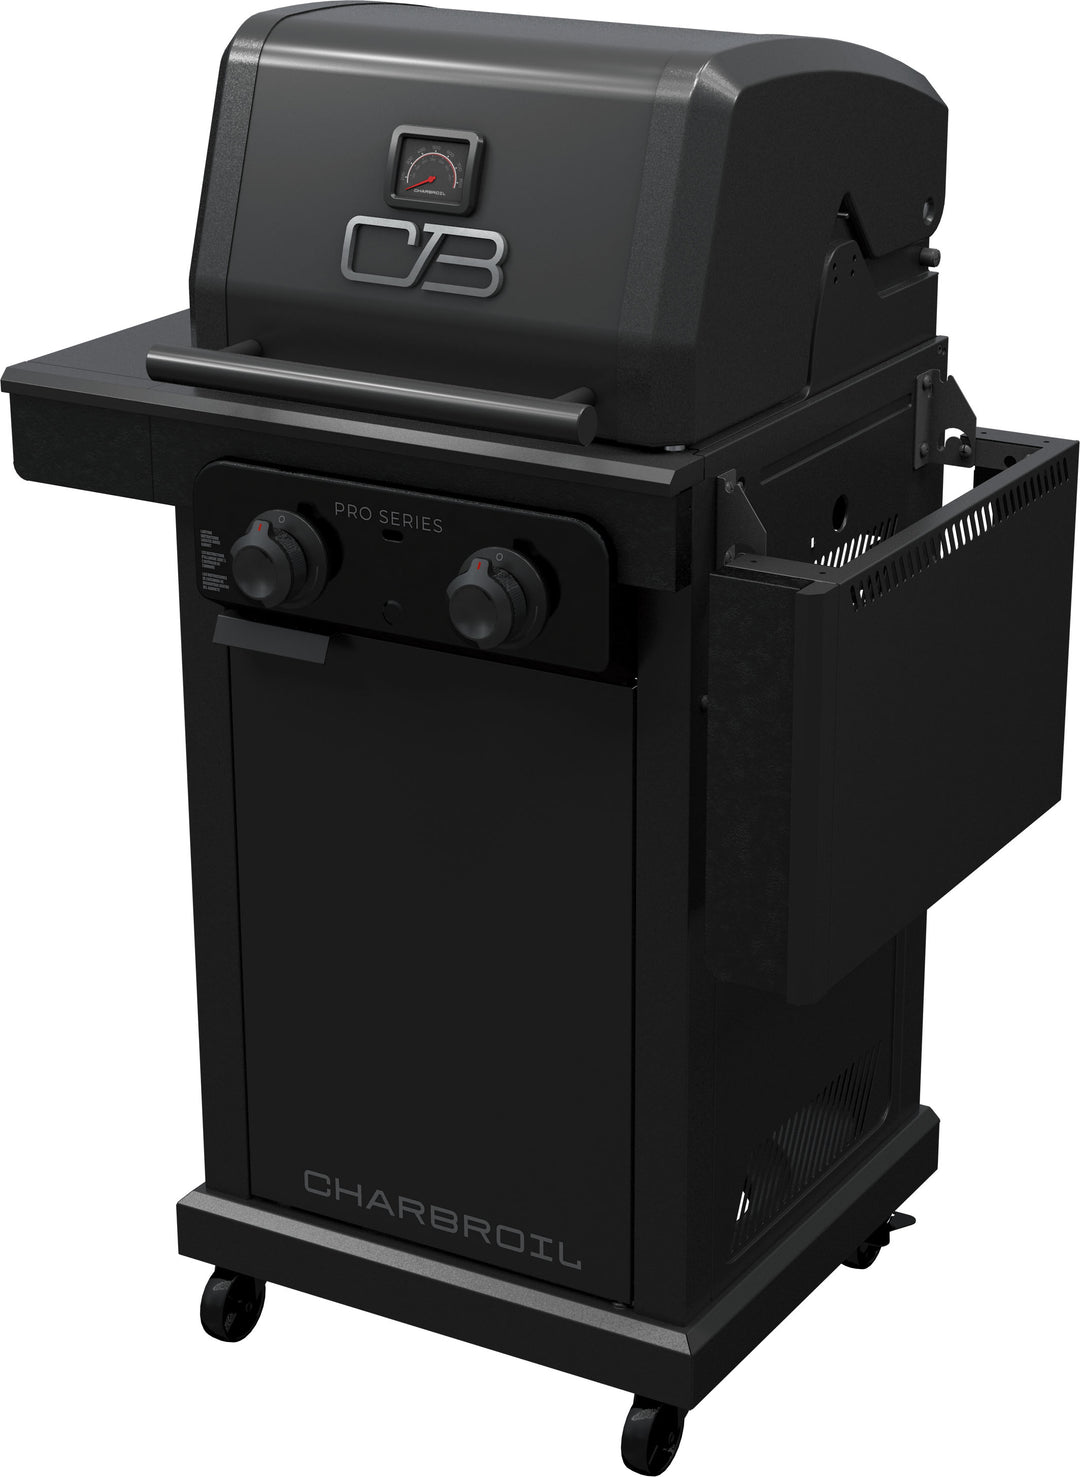 Char-Broil - Pro Series with Amplifire™ Infrared Technology 2-Burner Propane Gas Grill Cabinet, 463676724 - Black_7